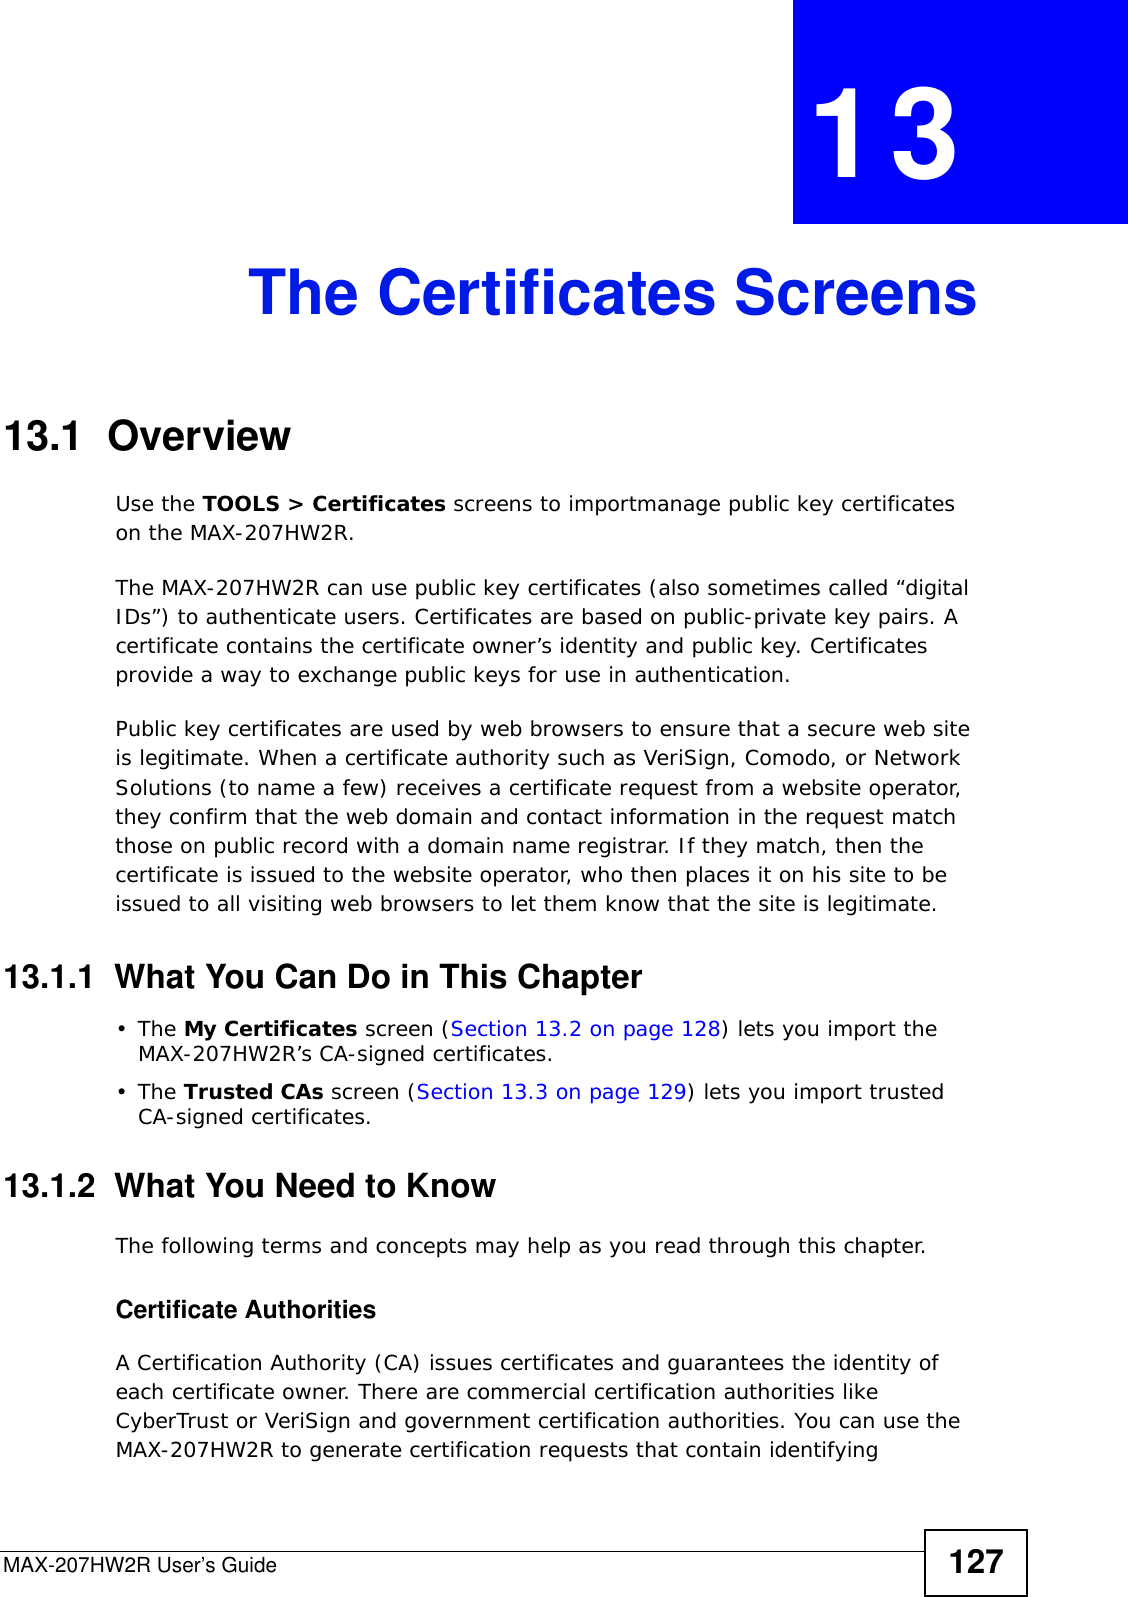 MAX-207HW2R User’s Guide 127CHAPTER  13 The Certificates Screens13.1  OverviewUse the TOOLS &gt; Certificates screens to importmanage public key certificates on the MAX-207HW2R.The MAX-207HW2R can use public key certificates (also sometimes called “digital IDs”) to authenticate users. Certificates are based on public-private key pairs. A certificate contains the certificate owner’s identity and public key. Certificates provide a way to exchange public keys for use in authentication.Public key certificates are used by web browsers to ensure that a secure web site is legitimate. When a certificate authority such as VeriSign, Comodo, or Network Solutions (to name a few) receives a certificate request from a website operator, they confirm that the web domain and contact information in the request match those on public record with a domain name registrar. If they match, then the certificate is issued to the website operator, who then places it on his site to be issued to all visiting web browsers to let them know that the site is legitimate.13.1.1  What You Can Do in This Chapter•The My Certificates screen (Section 13.2 on page 128) lets you import the MAX-207HW2R’s CA-signed certificates.•The Trusted CAs screen (Section 13.3 on page 129) lets you import trusted CA-signed certificates.13.1.2  What You Need to KnowThe following terms and concepts may help as you read through this chapter.Certificate AuthoritiesA Certification Authority (CA) issues certificates and guarantees the identity of each certificate owner. There are commercial certification authorities like CyberTrust or VeriSign and government certification authorities. You can use the MAX-207HW2R to generate certification requests that contain identifying 